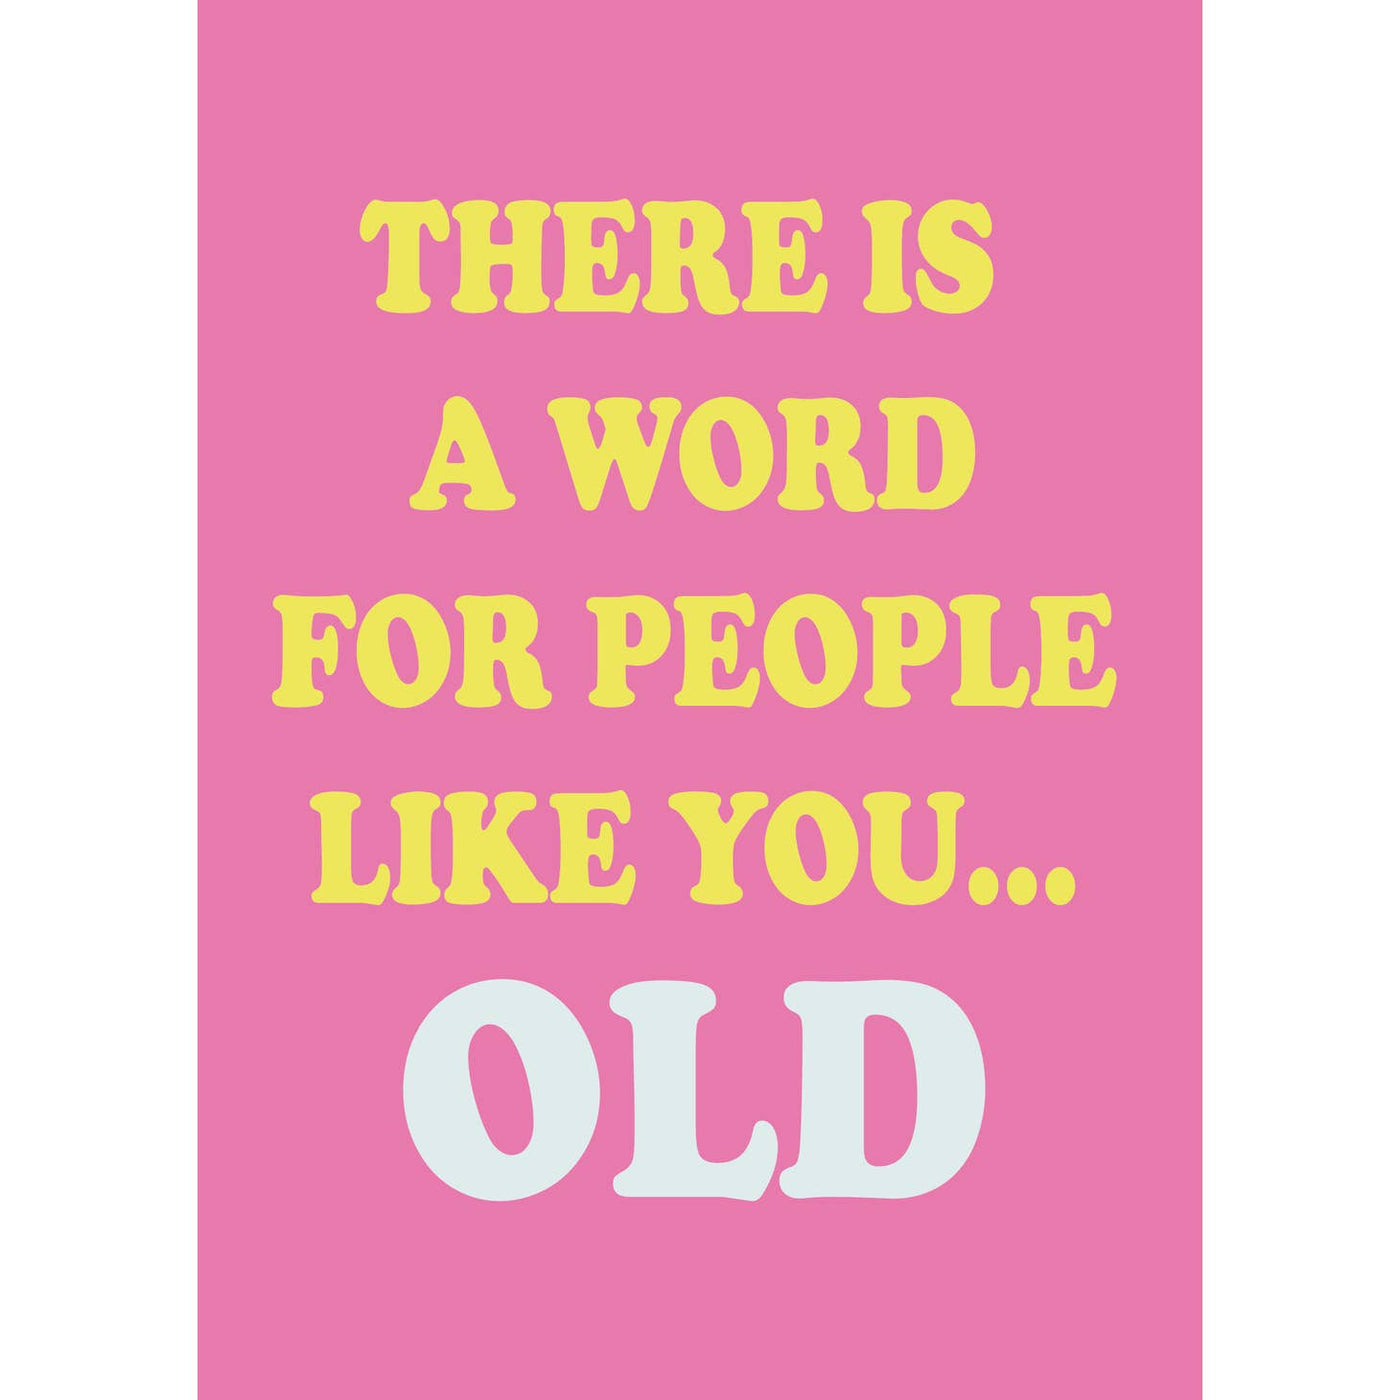 There is a Word For People Like You: Old Birthday Card (Pink)